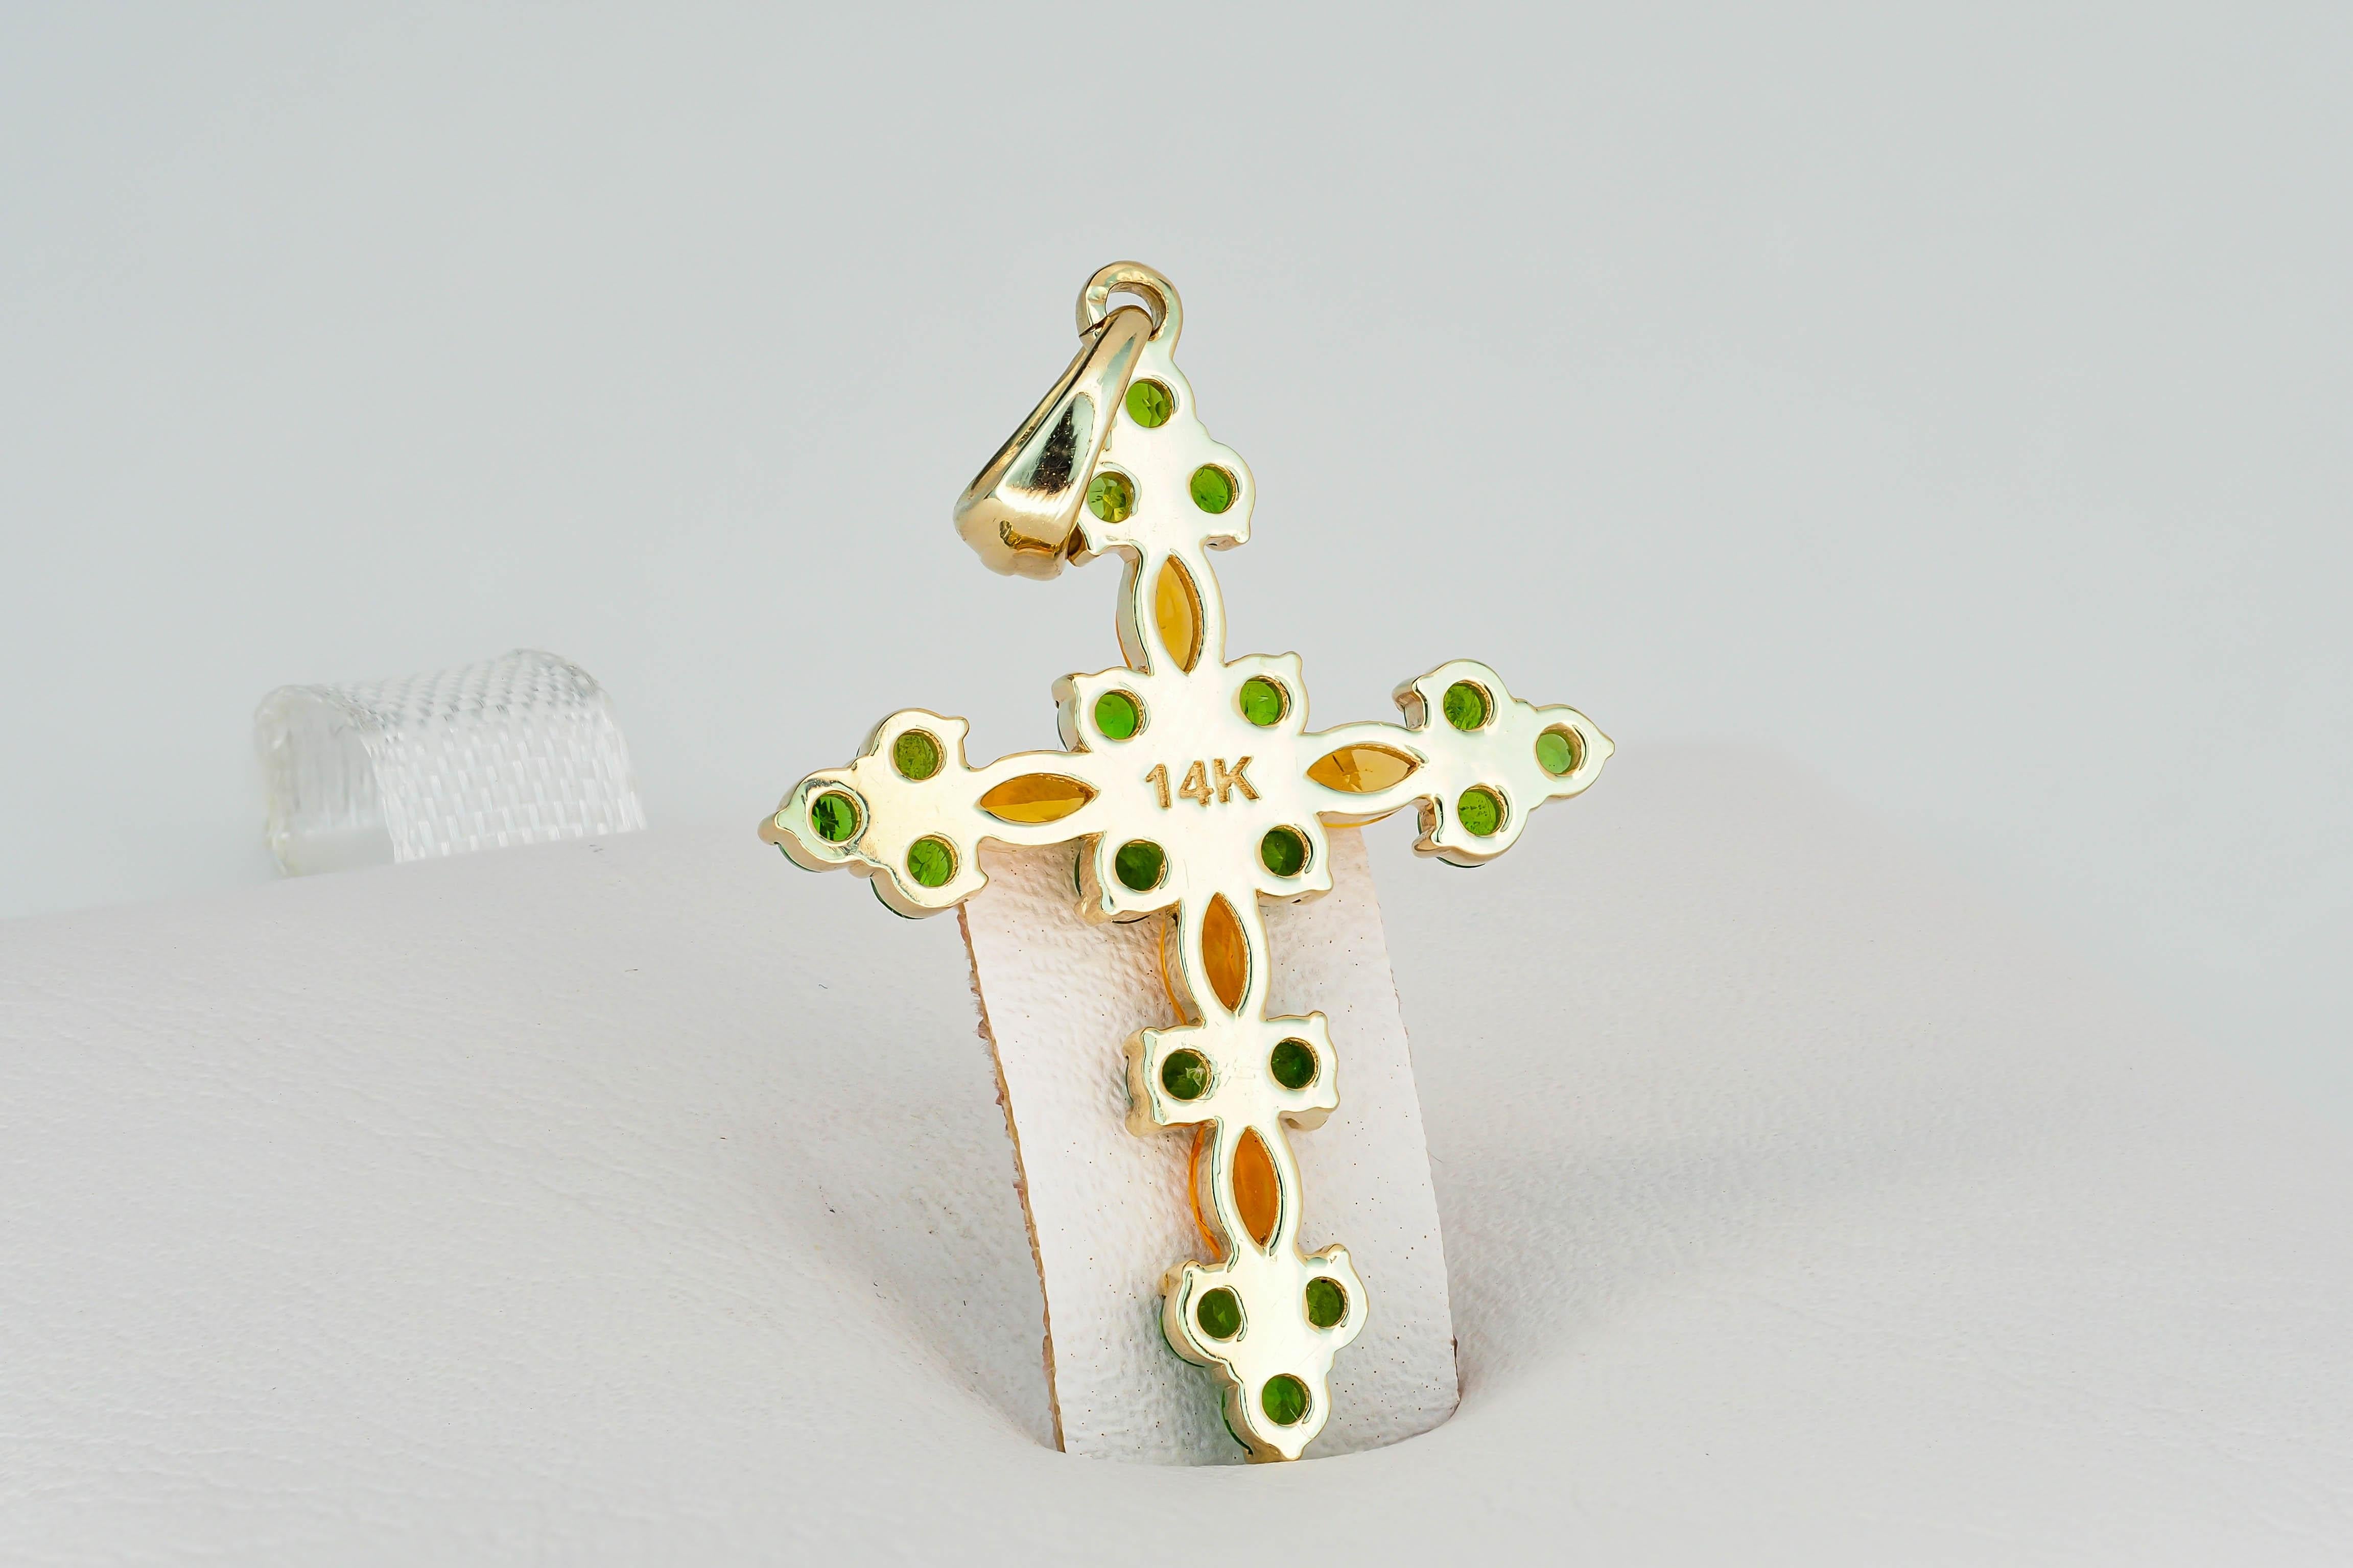 Women's 14k Gold Cross Pendant with Colored Stones Opals and Tsavorites